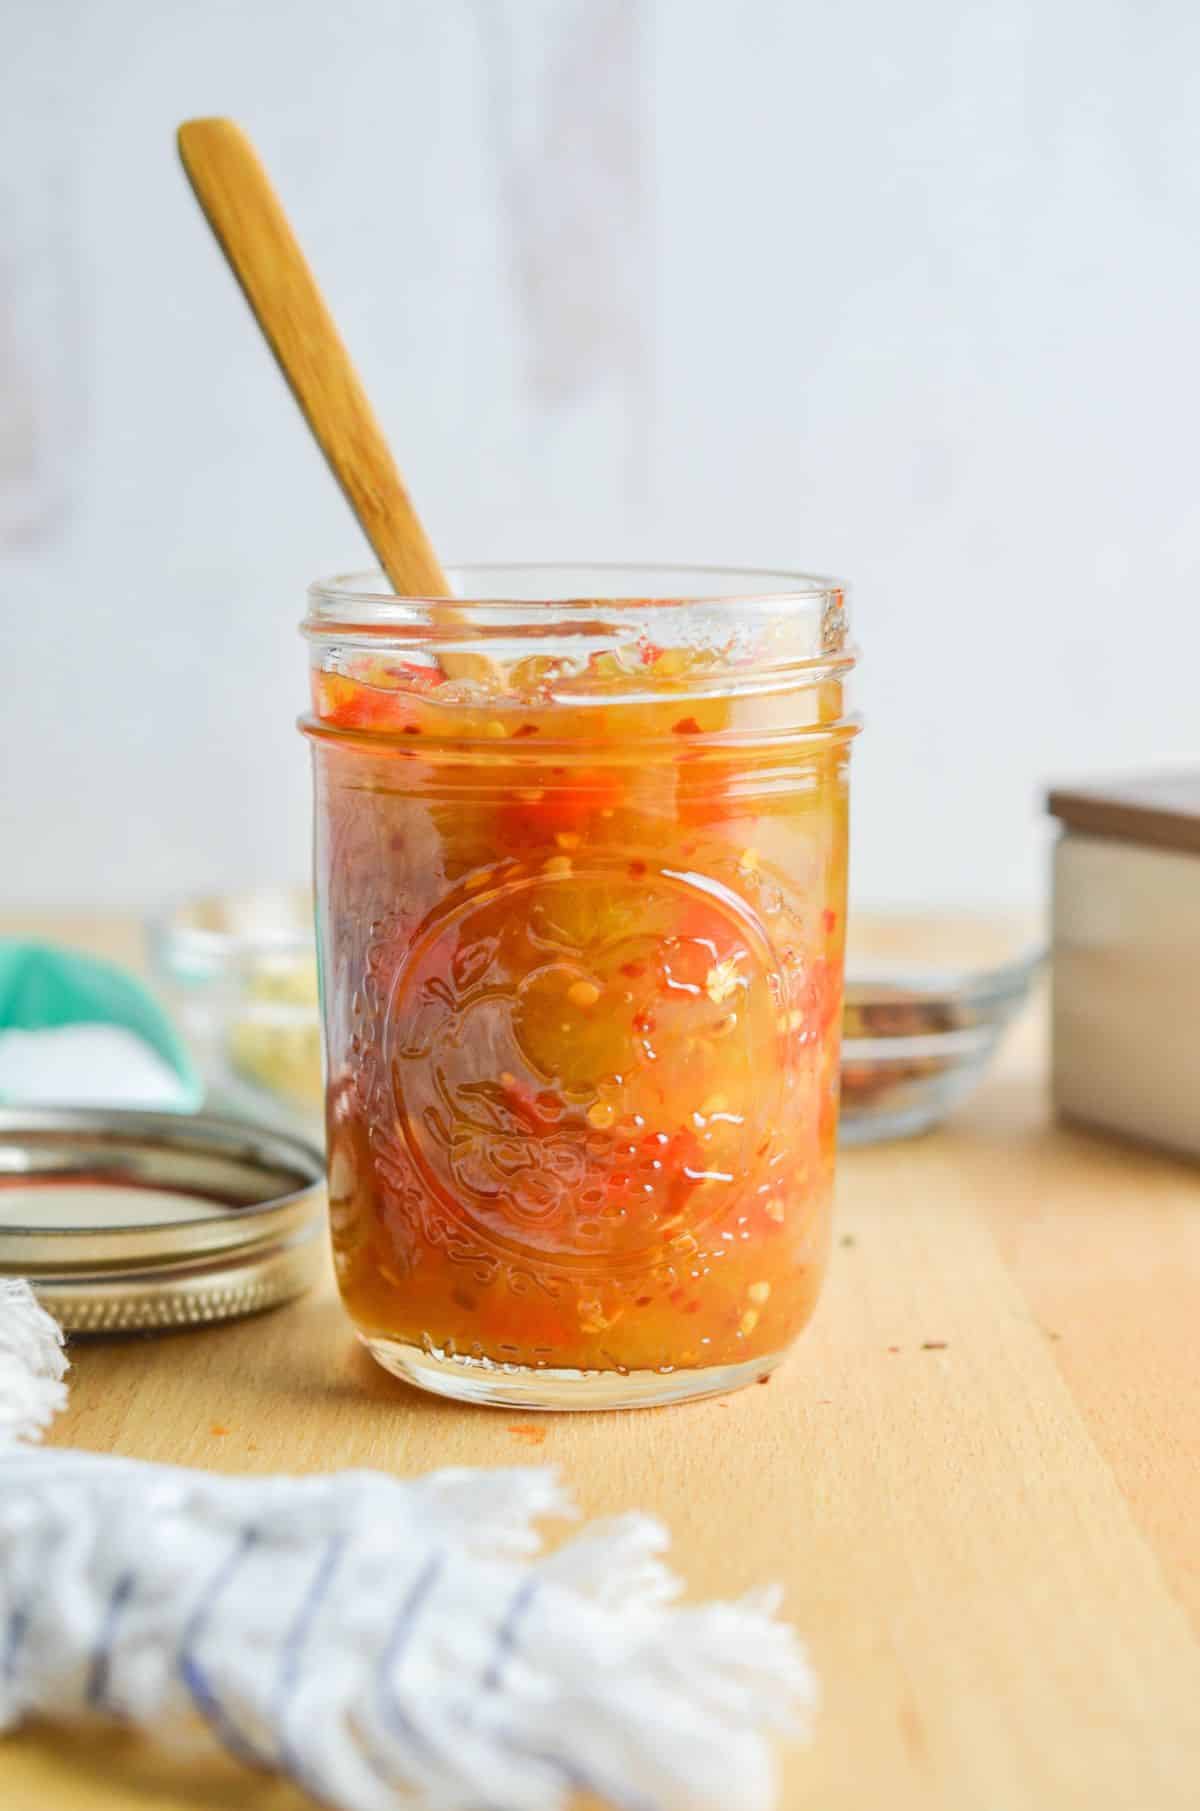 Spicy green tomato relish in a glass jar with a wooden spoon.